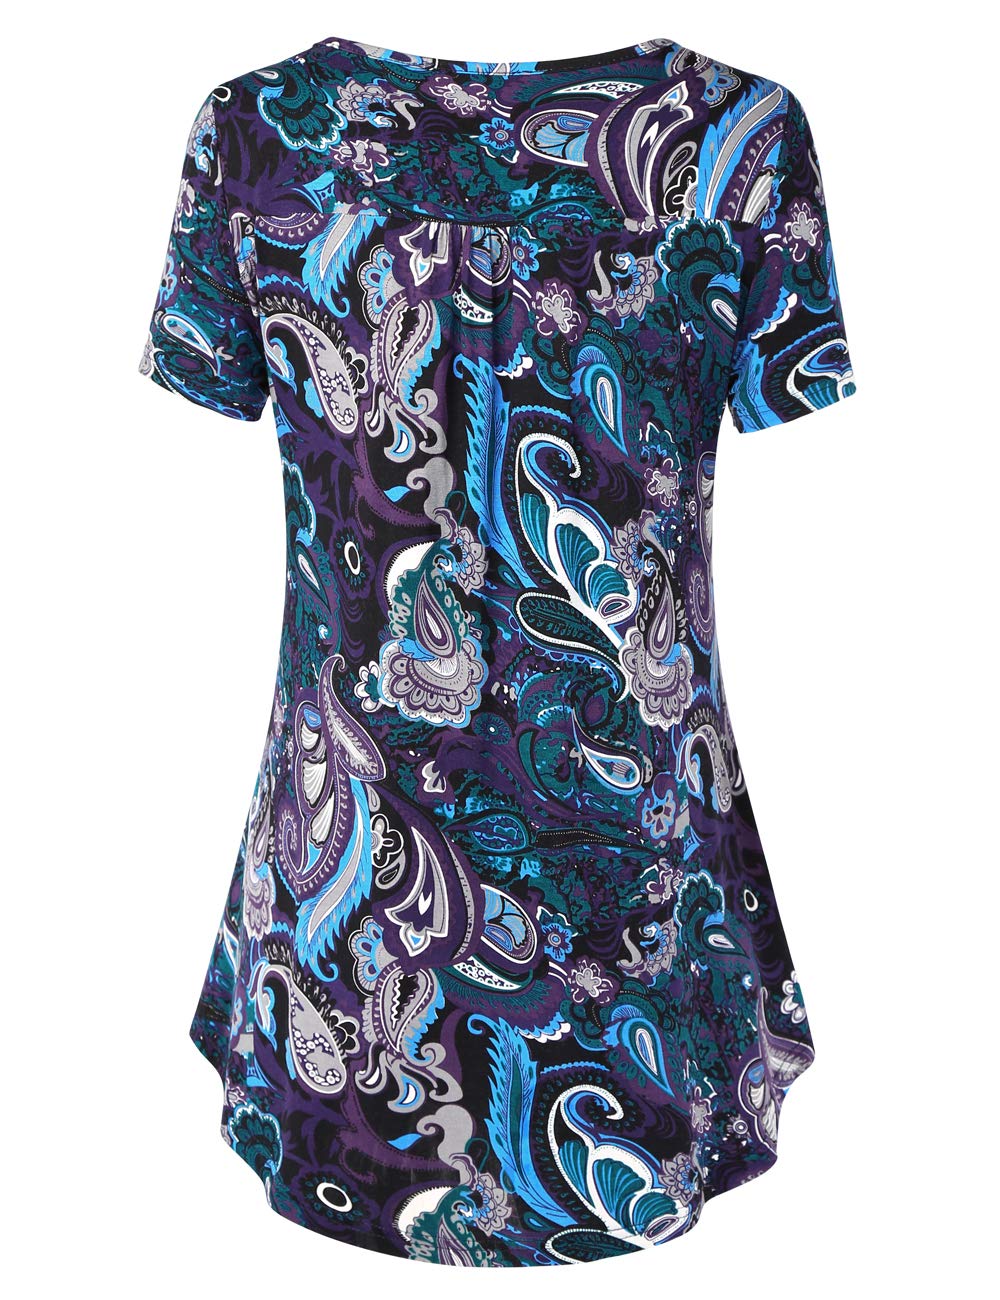 BAISHENGGT Purple Paisley Women's V Neck Buttons Pleated Flared Comfy Tunic Tops